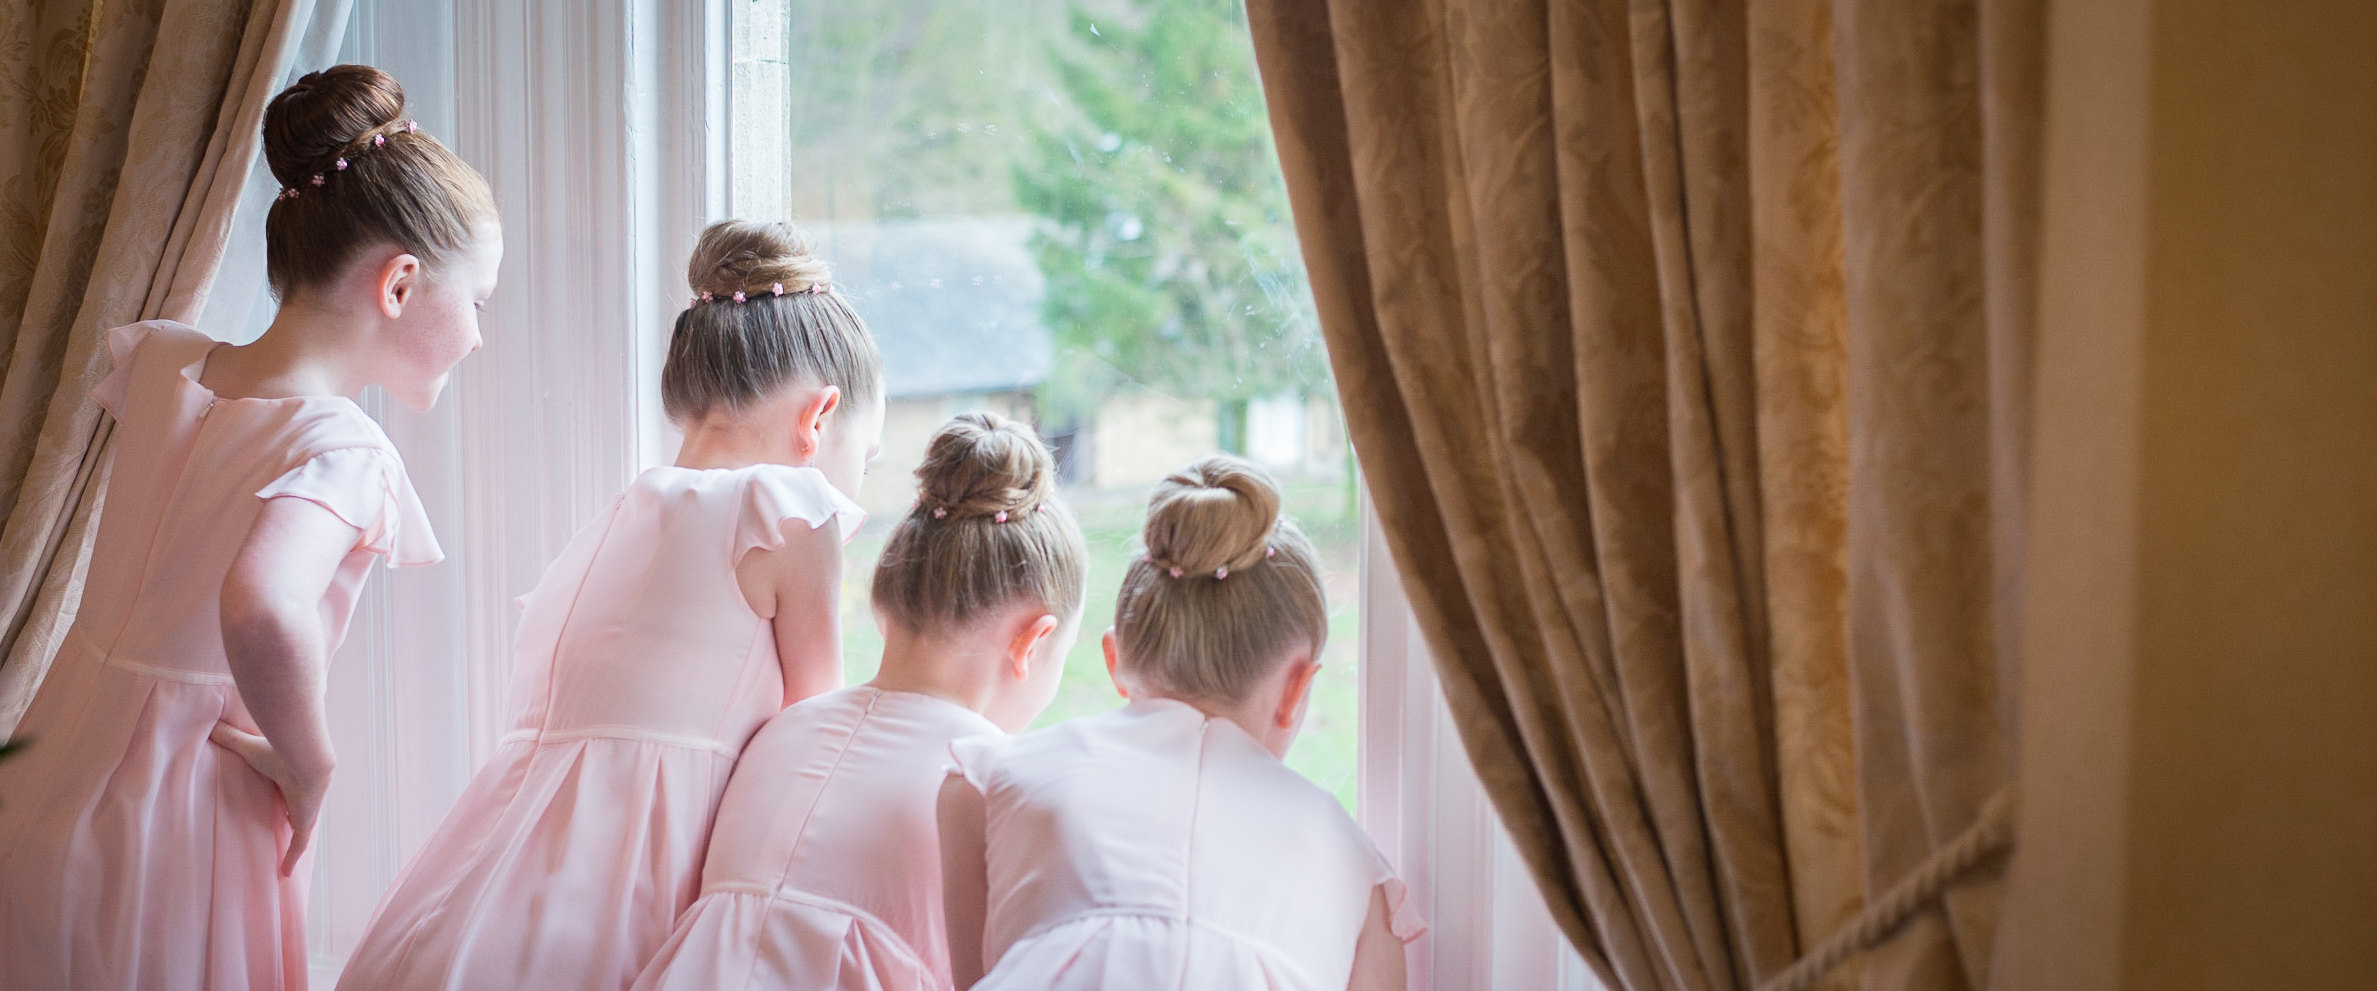 Bridesmaids looking out of the window during bridal prep. Wedding photography. www.gemmawillisphotography.co.uk